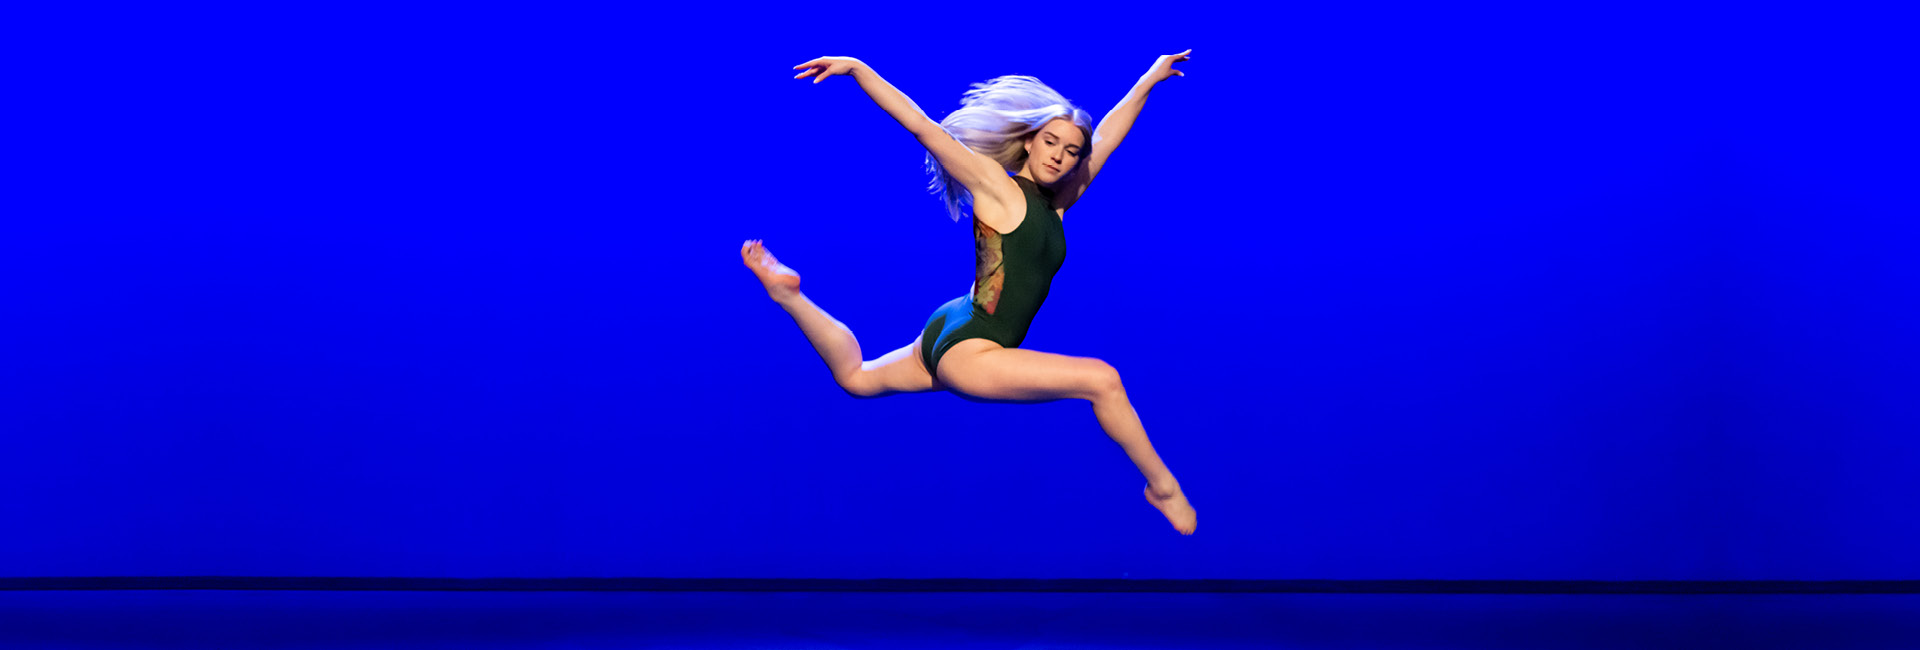 image of woman with gray hair leaping into the air